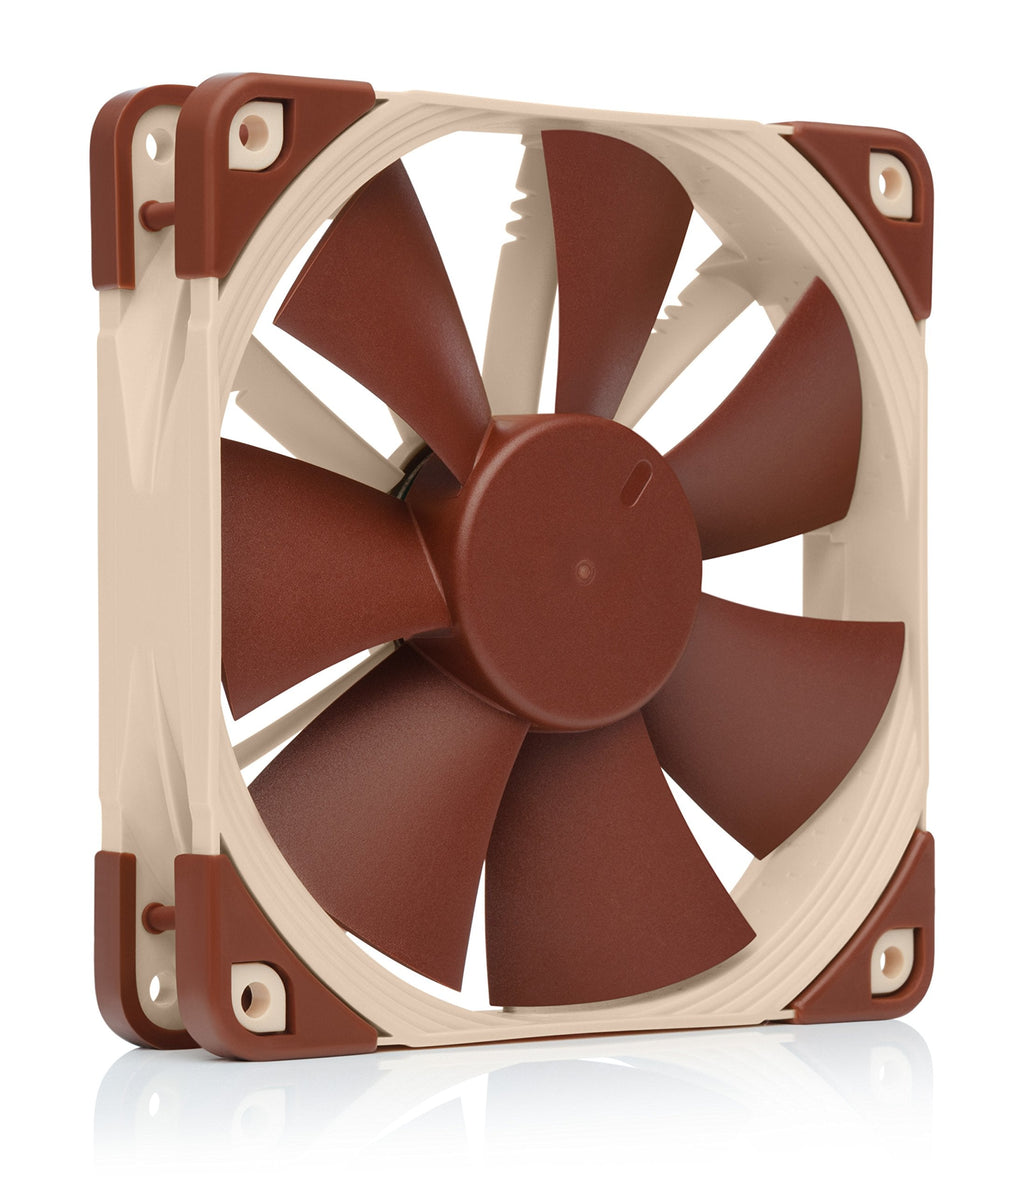  [AUSTRALIA] - Noctua NF-F12 5V PWM, Quiet Premium Fan with USB Power Adapter Cable, 4-Pin, 5V Version (120mm, Brown)